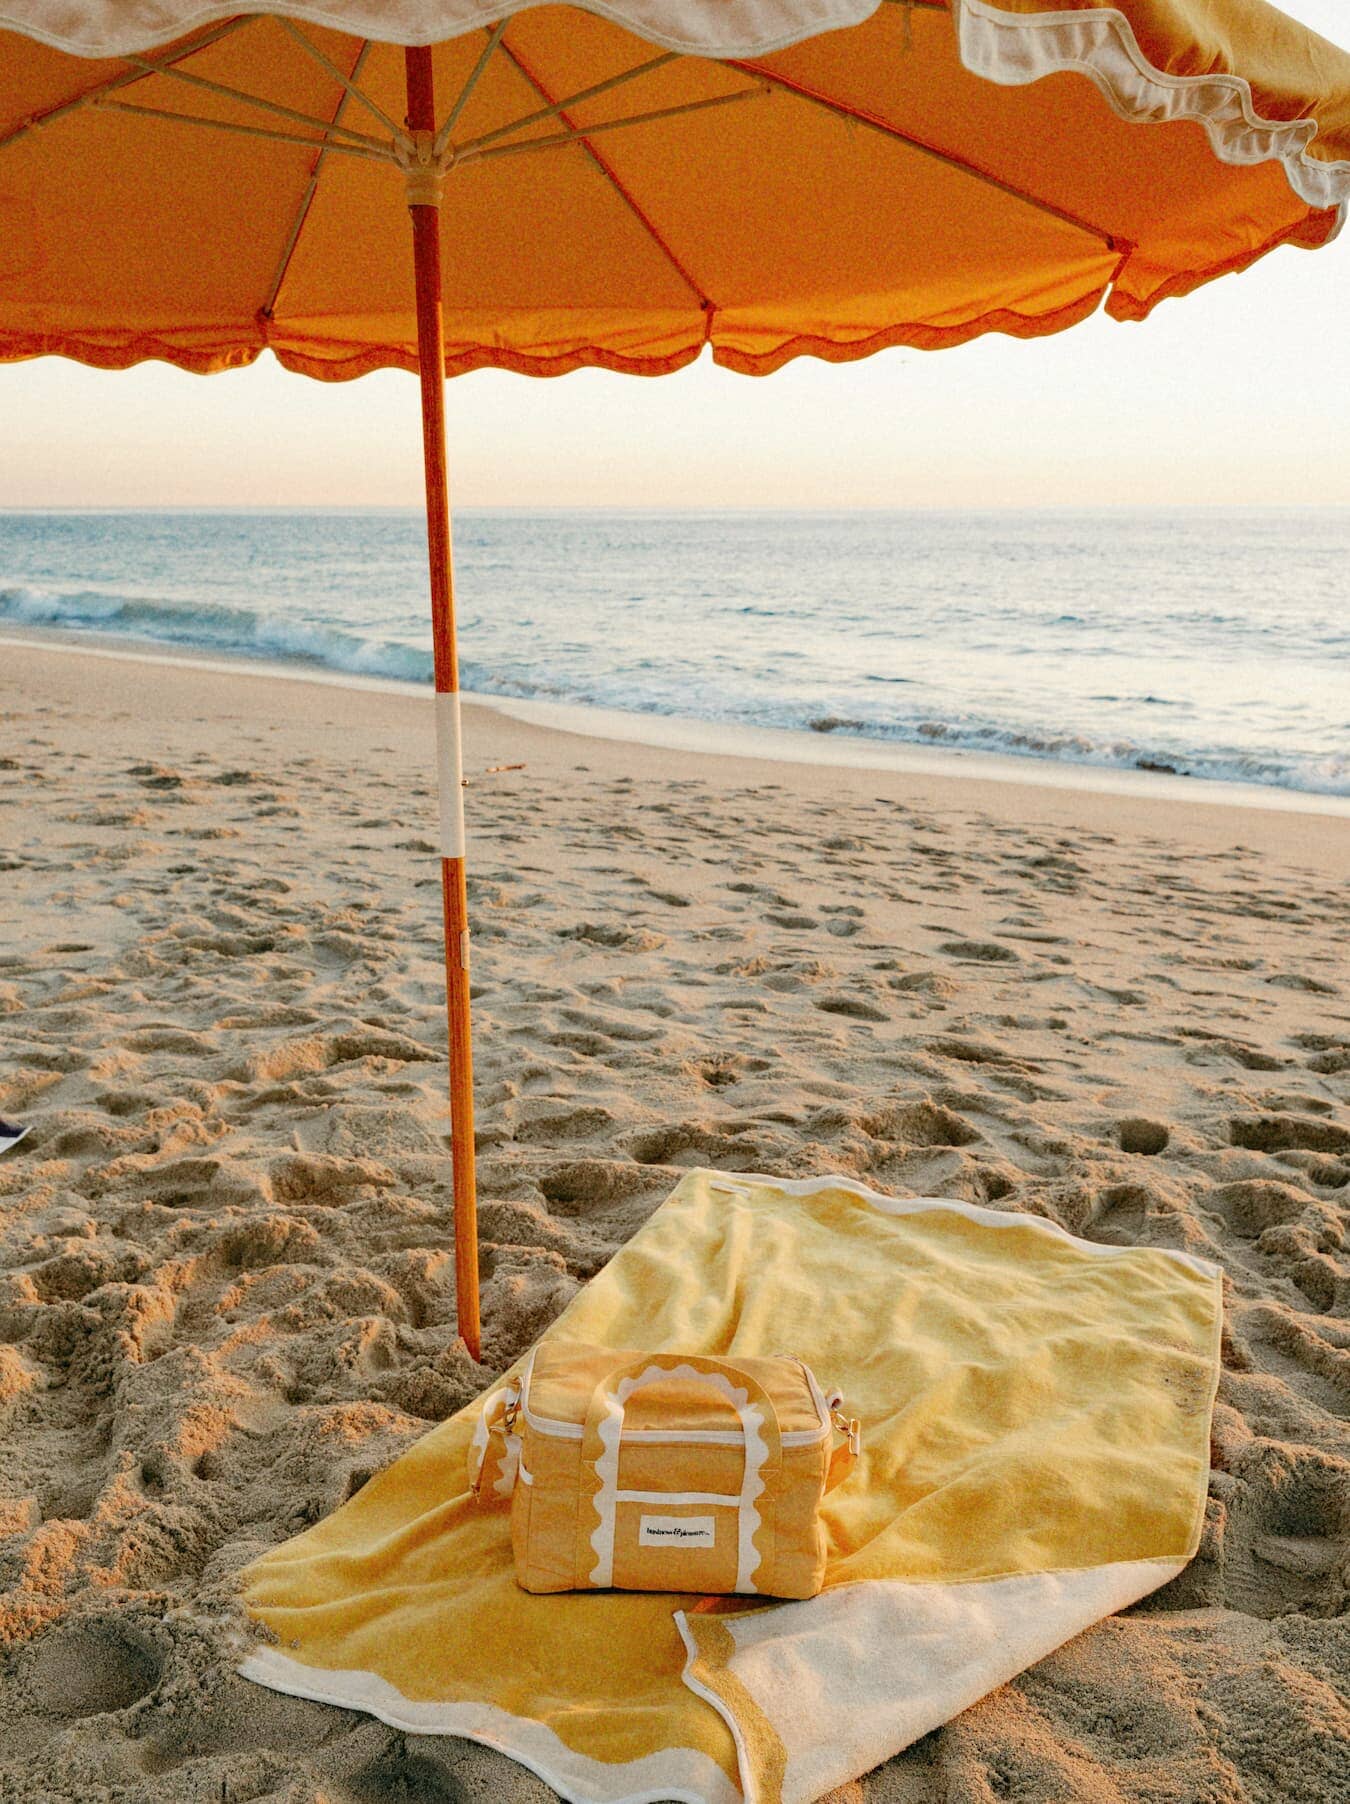 Riviera mimosa beach set up with towel, umbrella and cooler